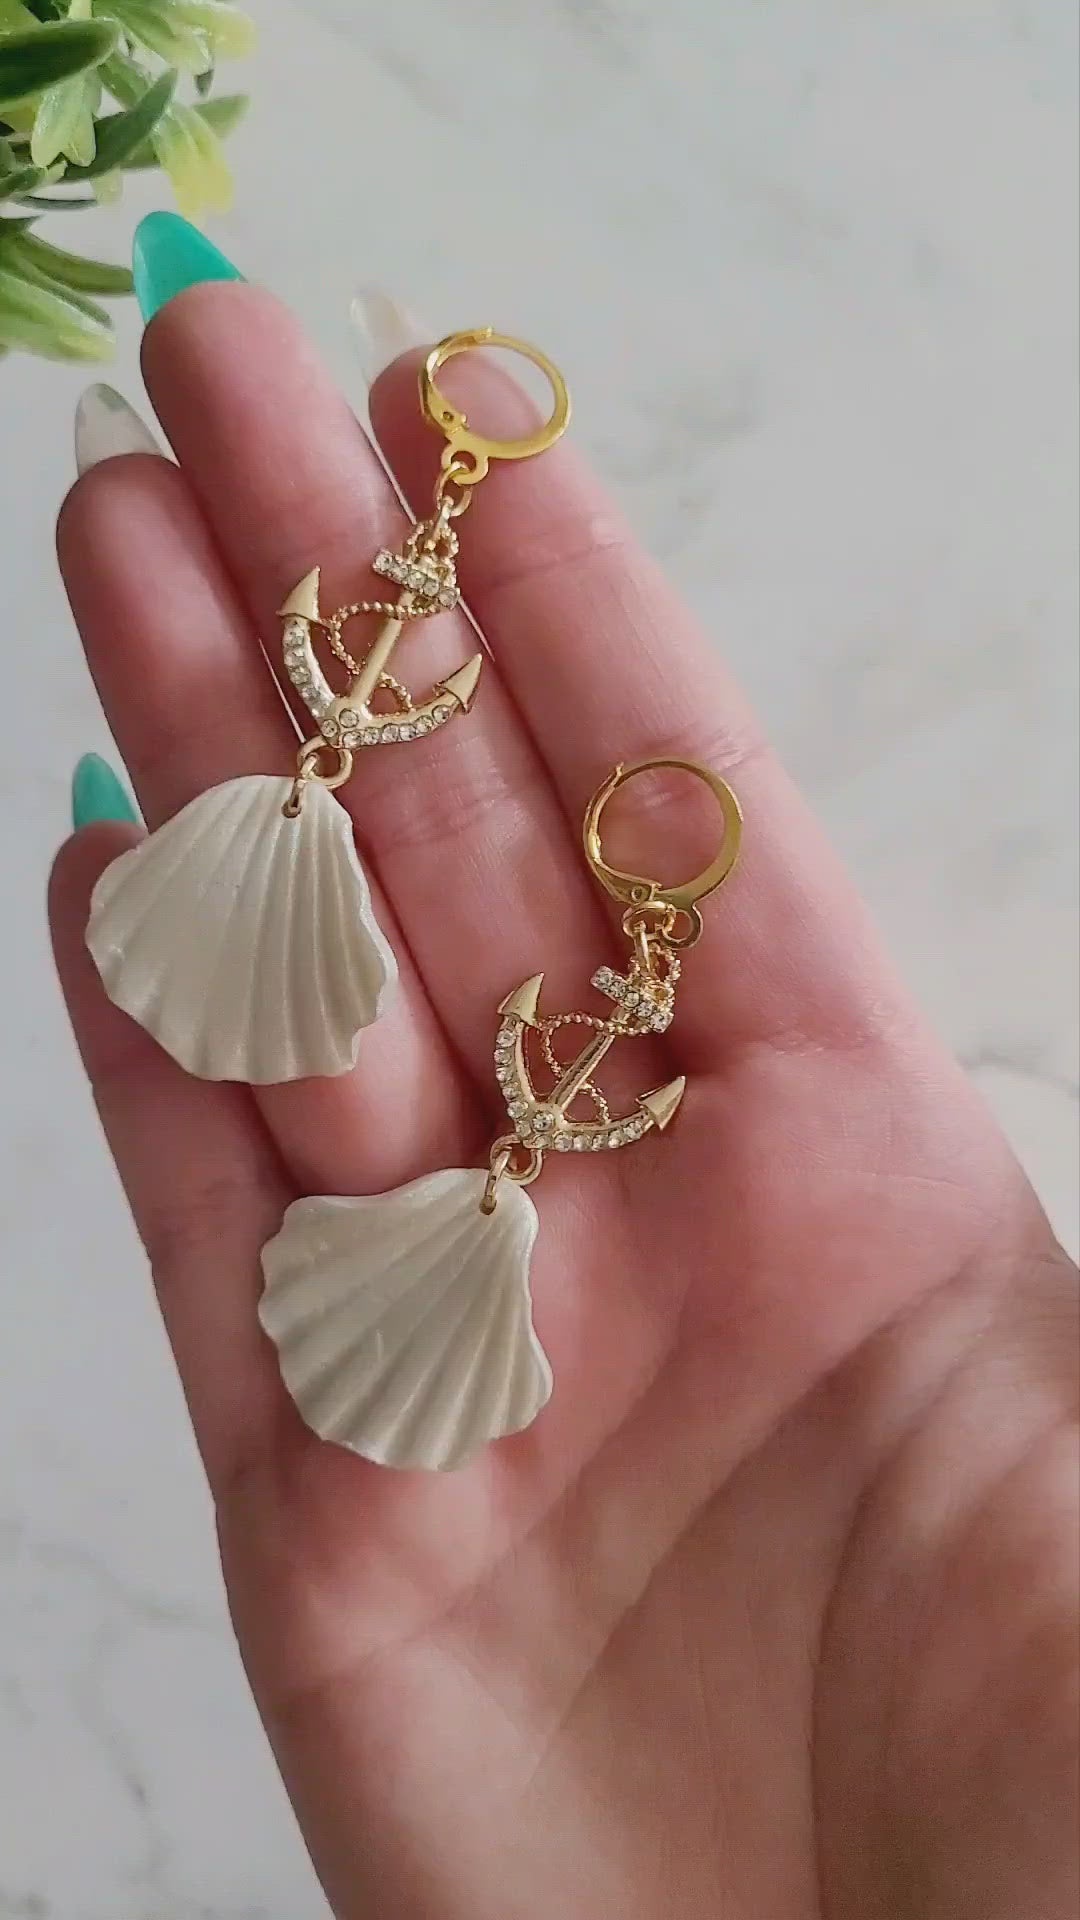 Close up of earrings with gold anchor charm and polymer clay sea shell